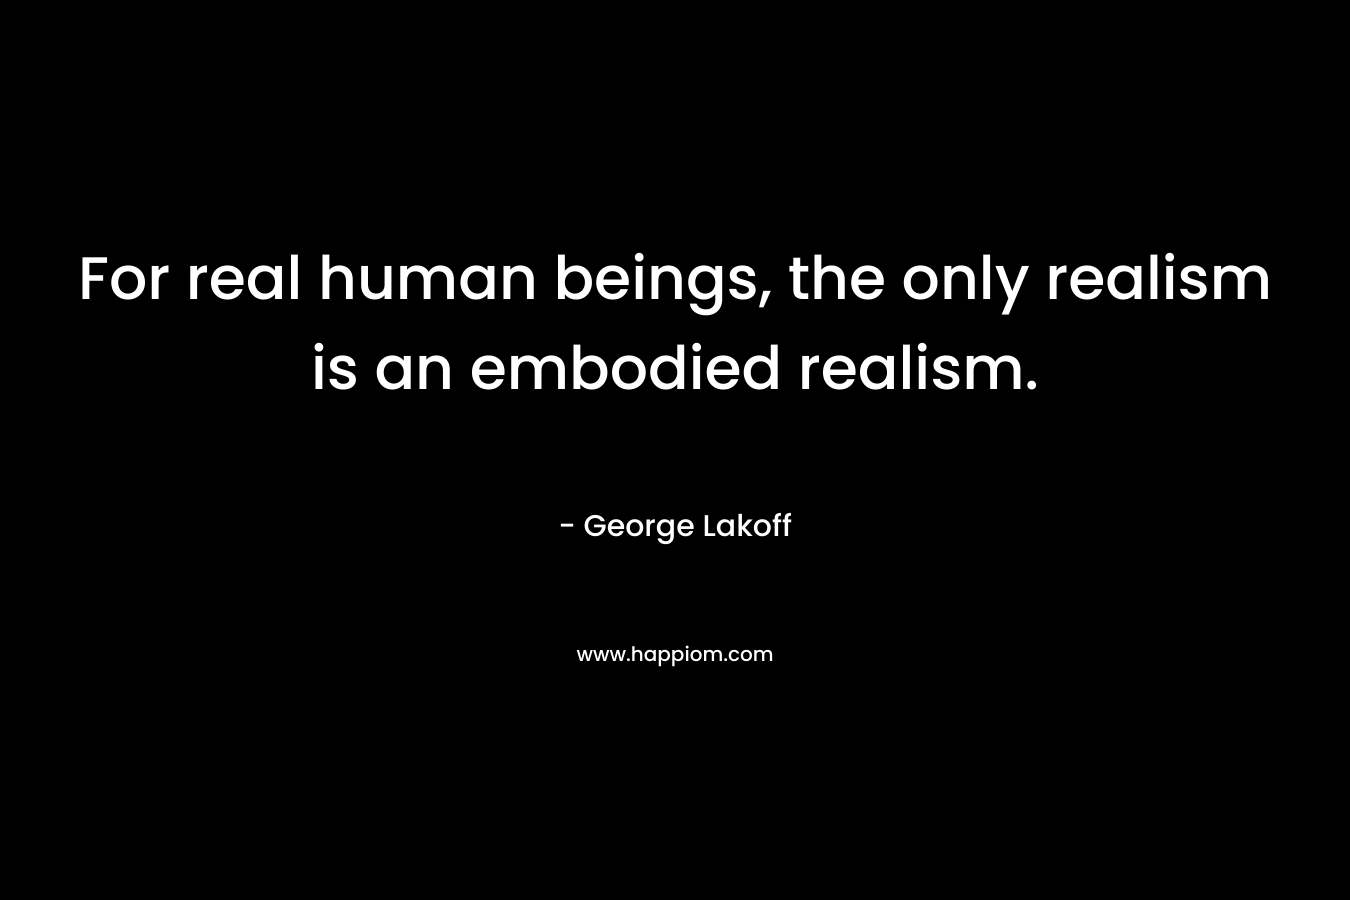 For real human beings, the only realism is an embodied realism. – George Lakoff